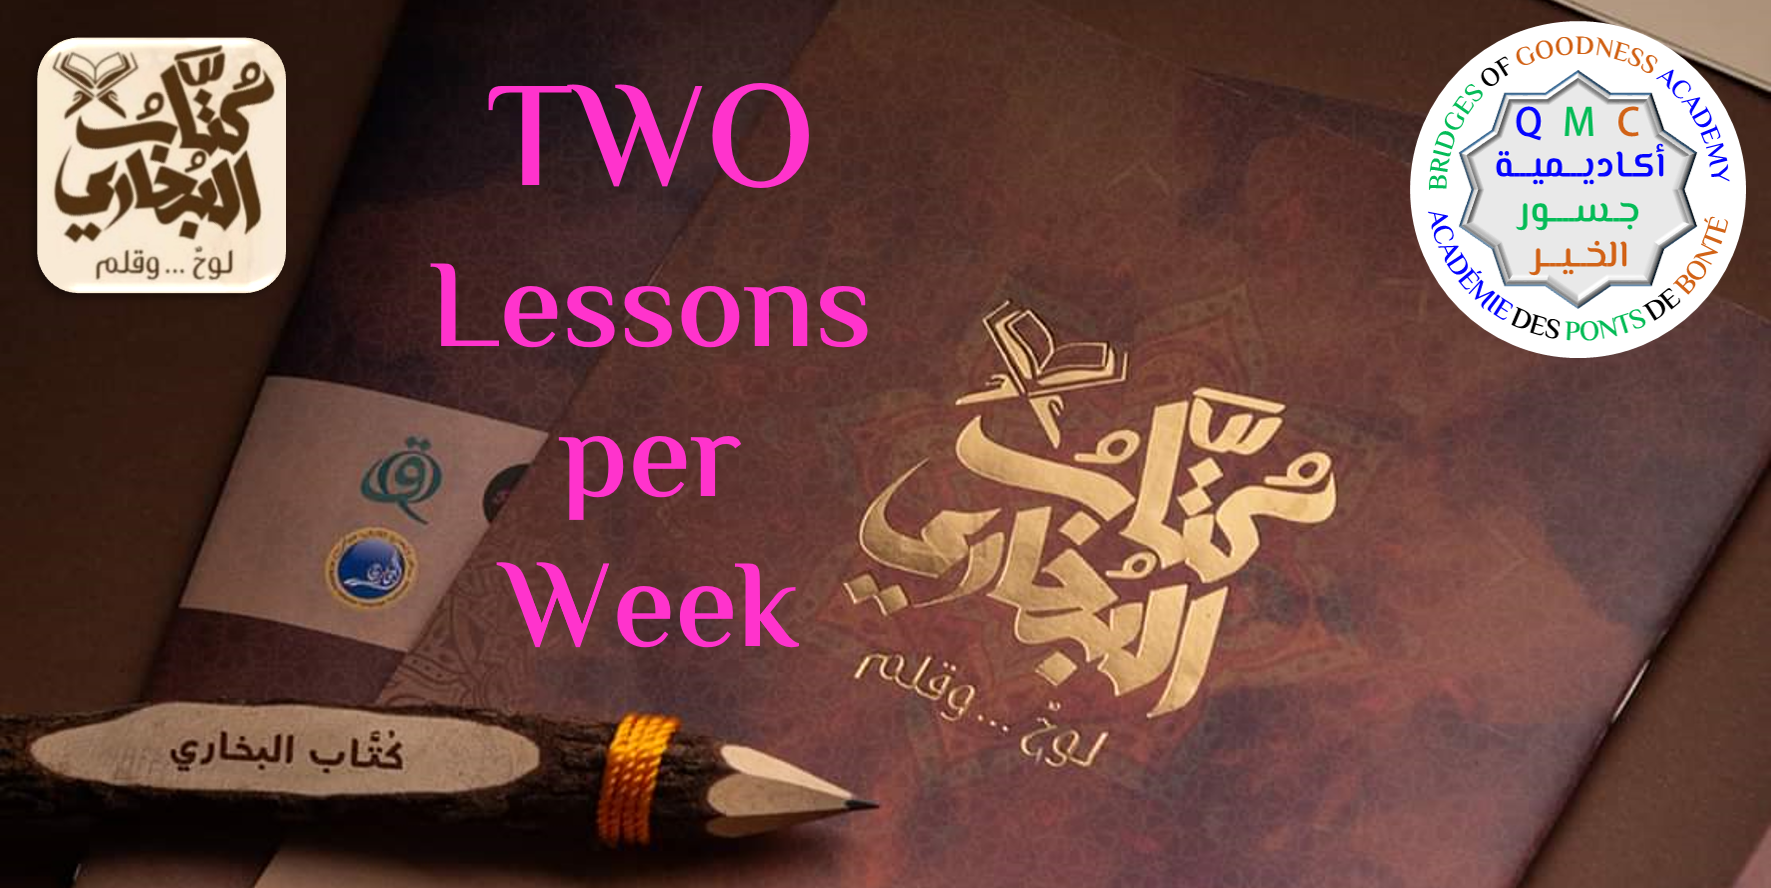 TWO LESSONS PER WEEK